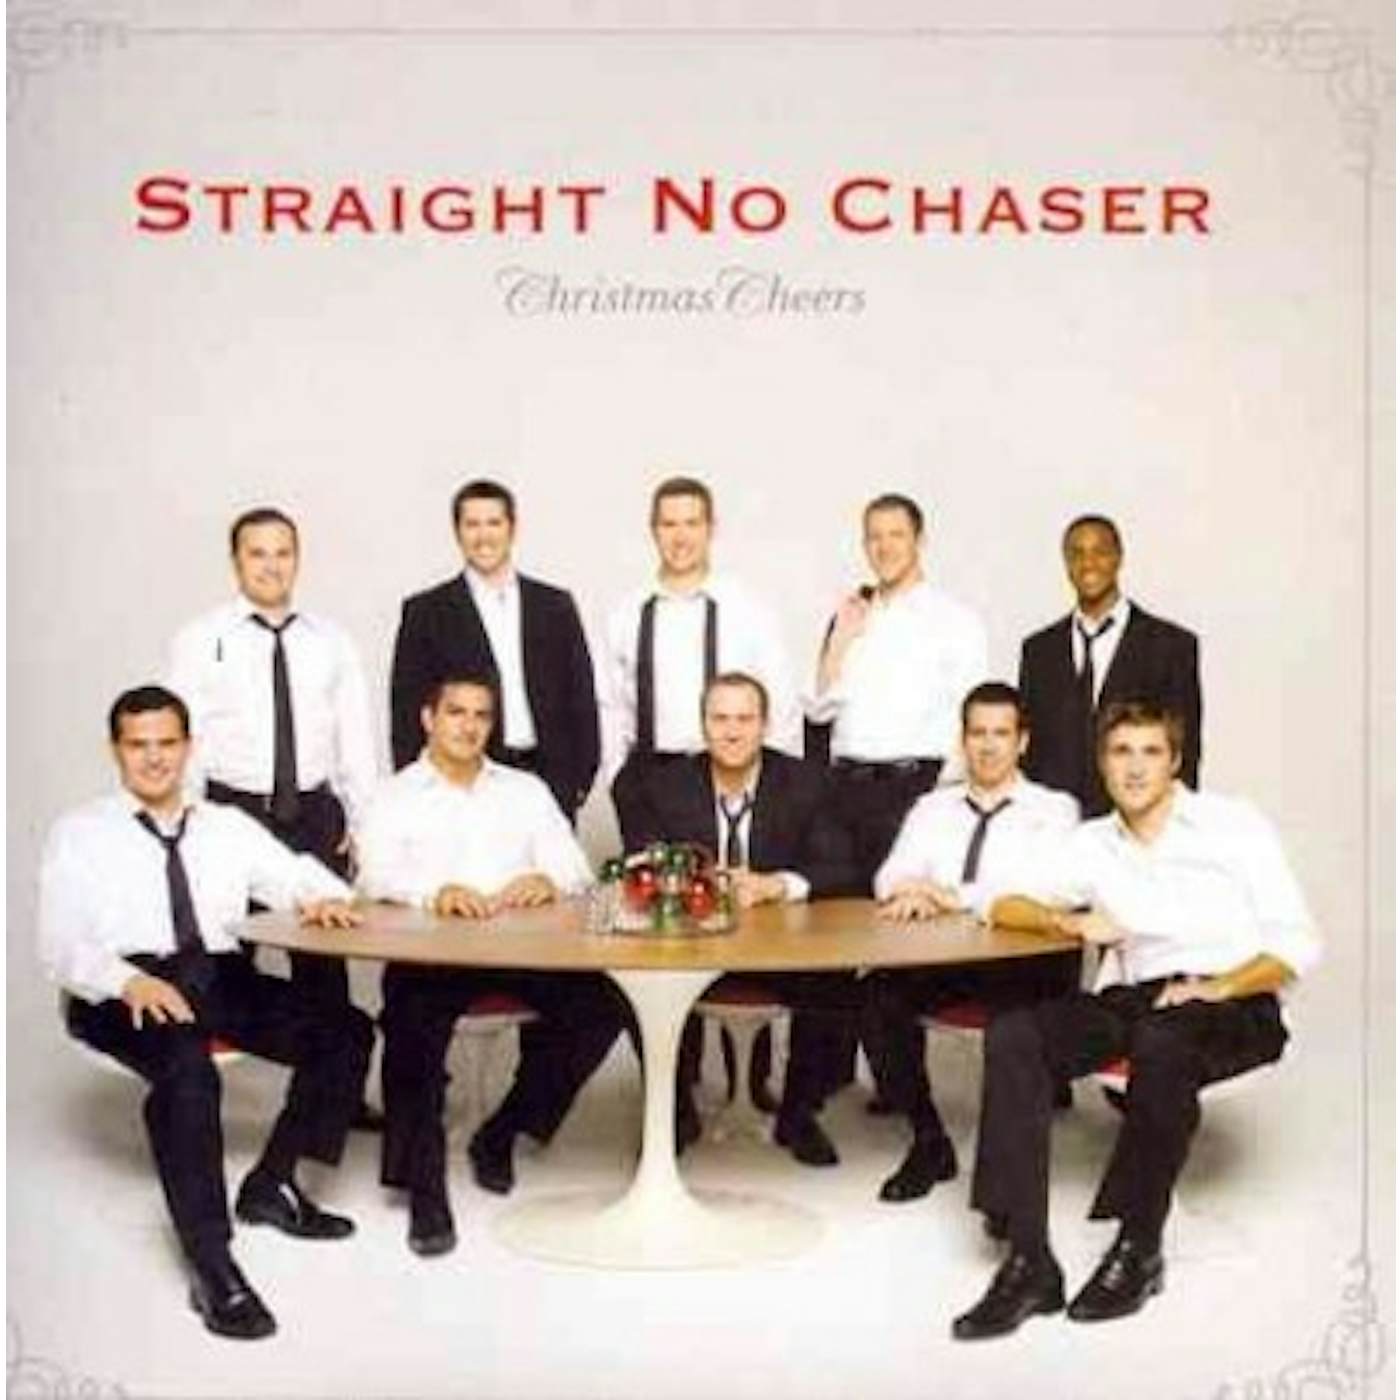 Straight No Chaser Christmas Cheers CD